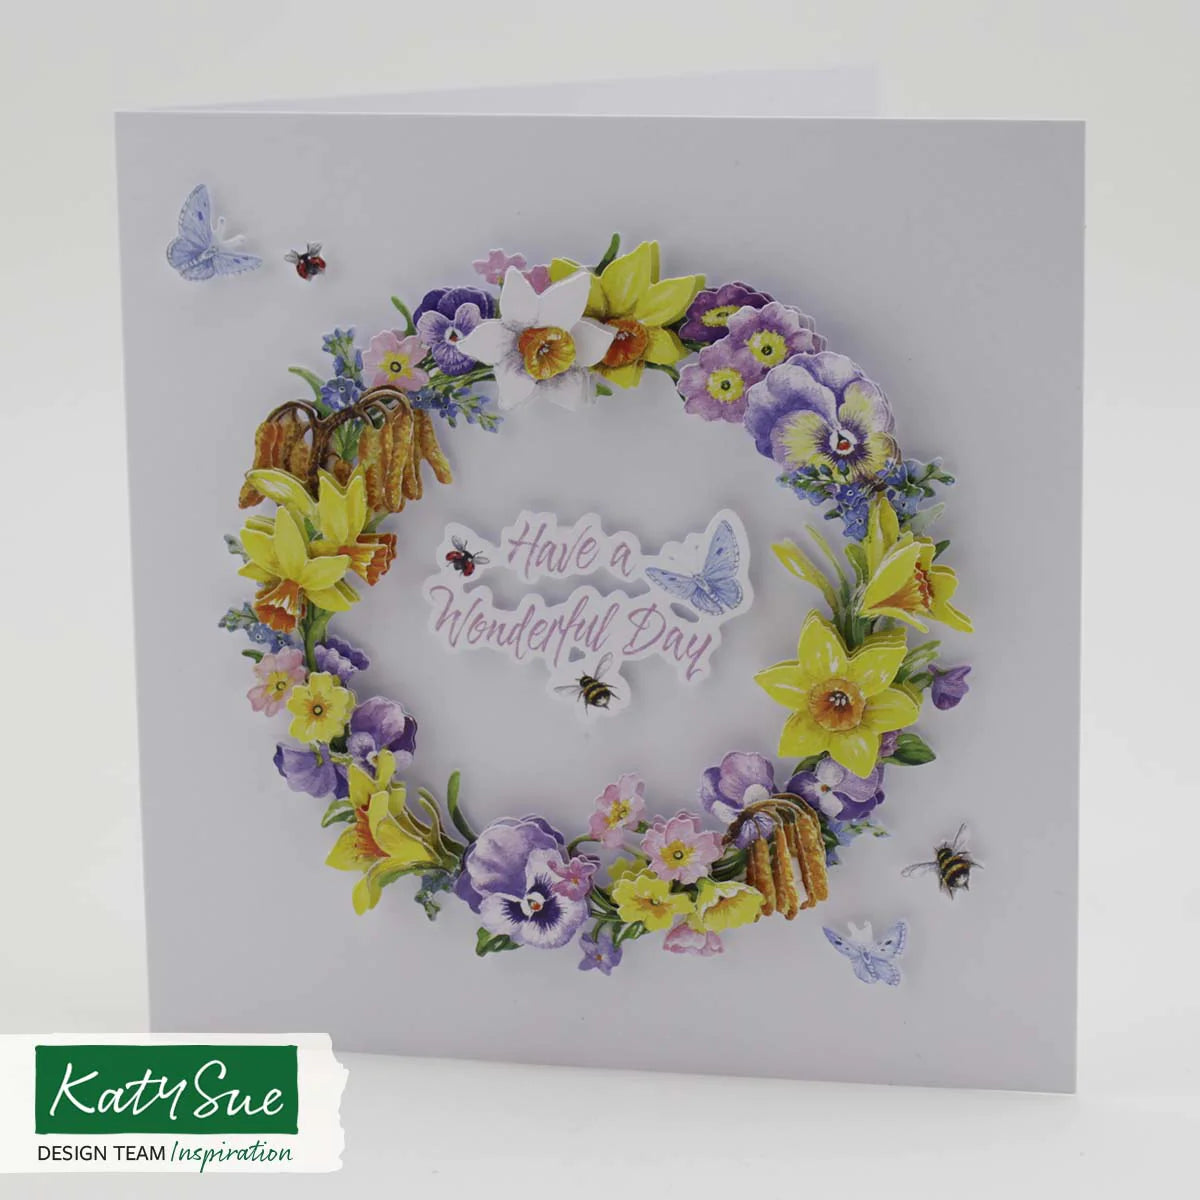 Die Cut Decoupage – Spring and Easter (Pack Of 12)